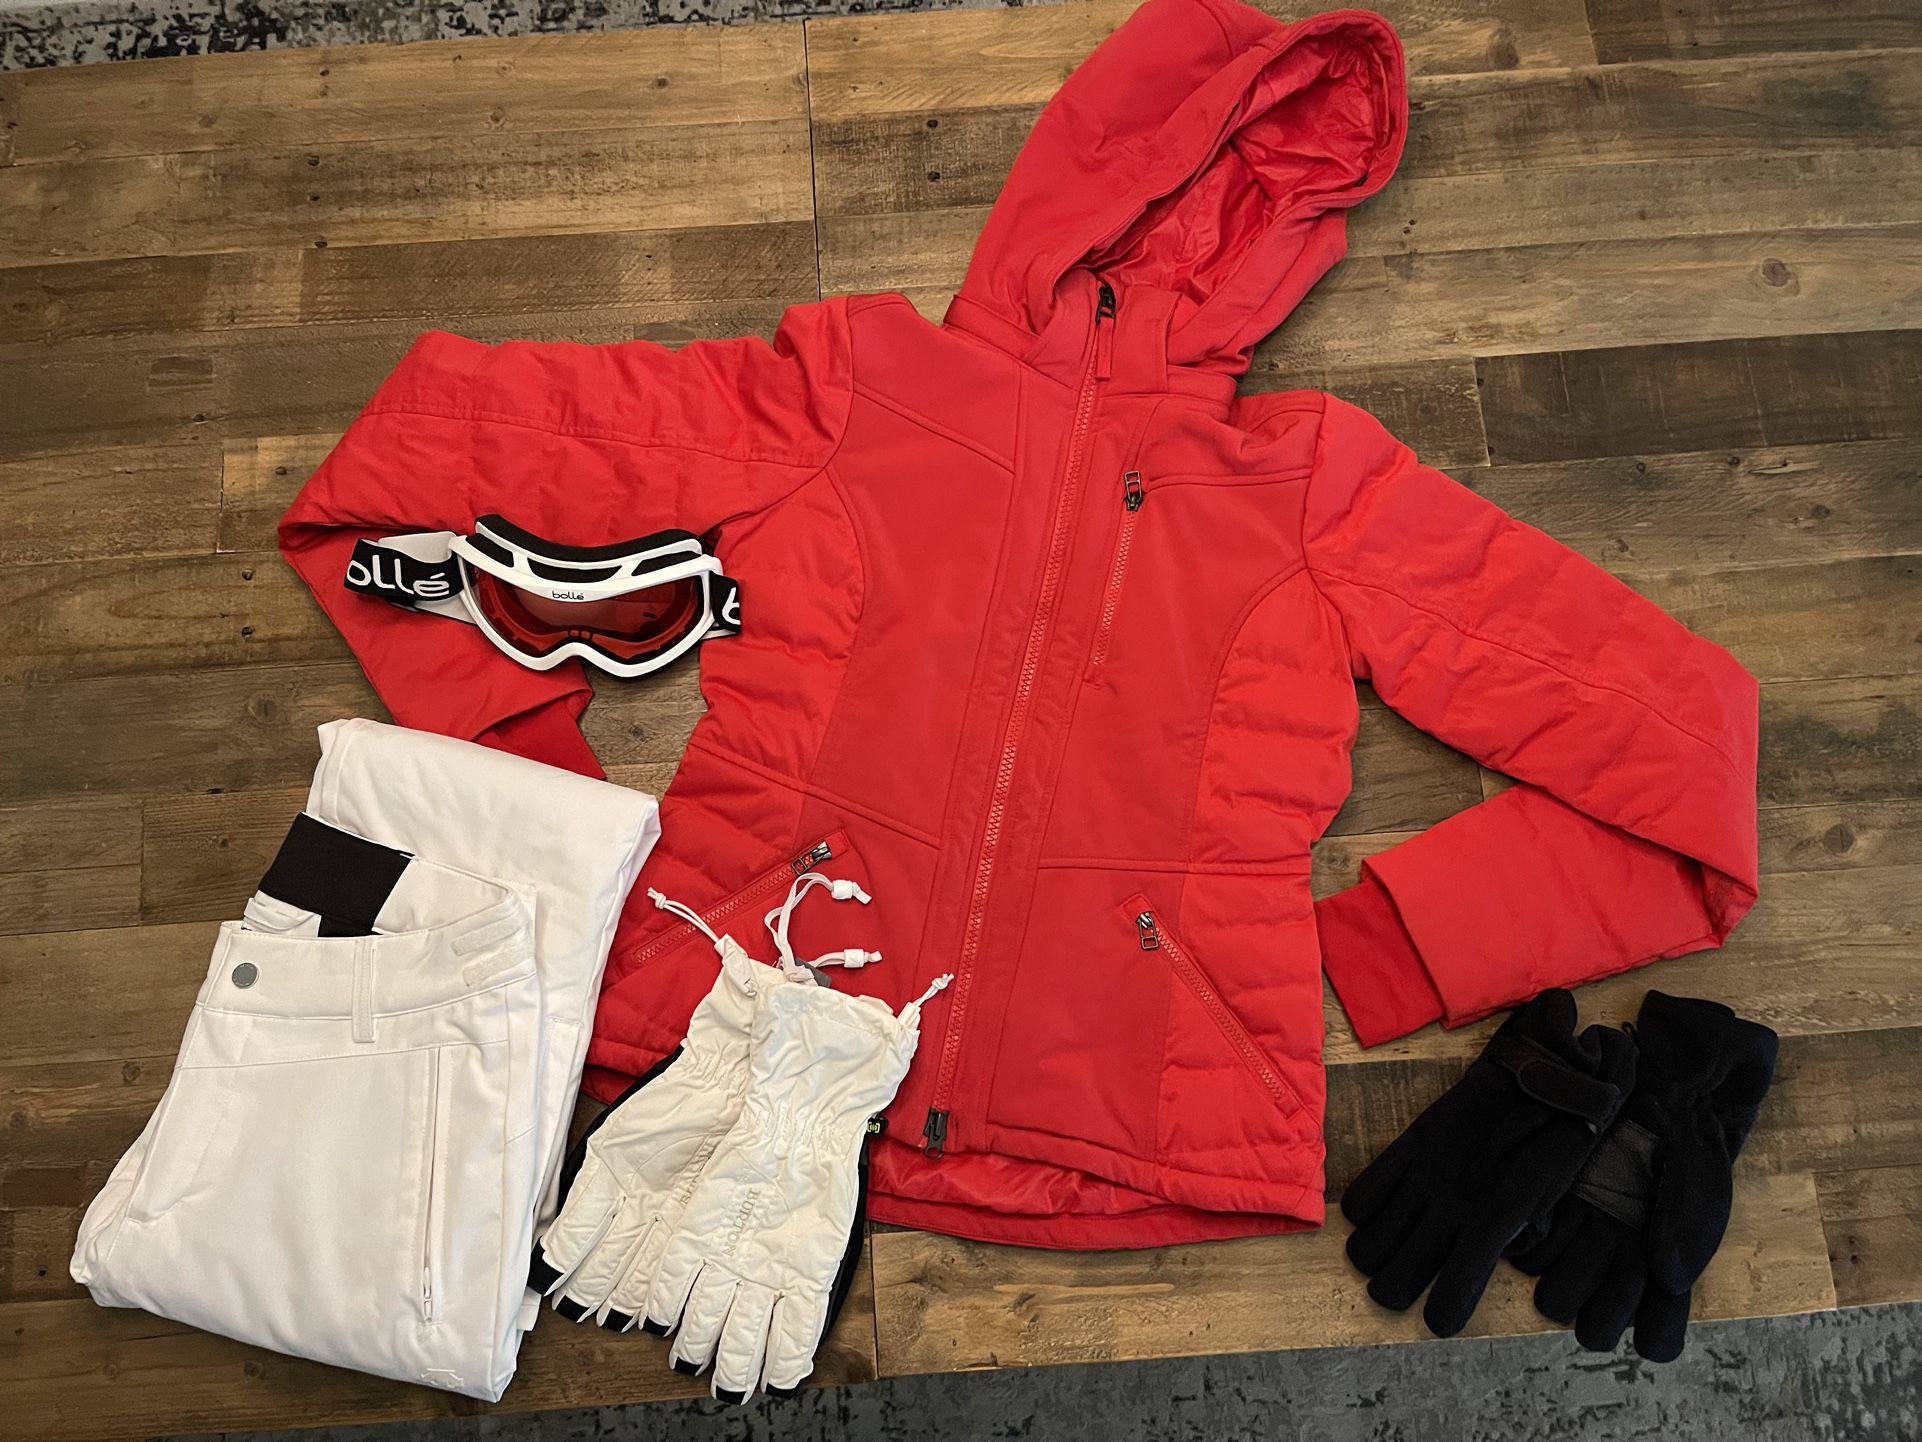 Women’s Ski Outfit - SMALL 